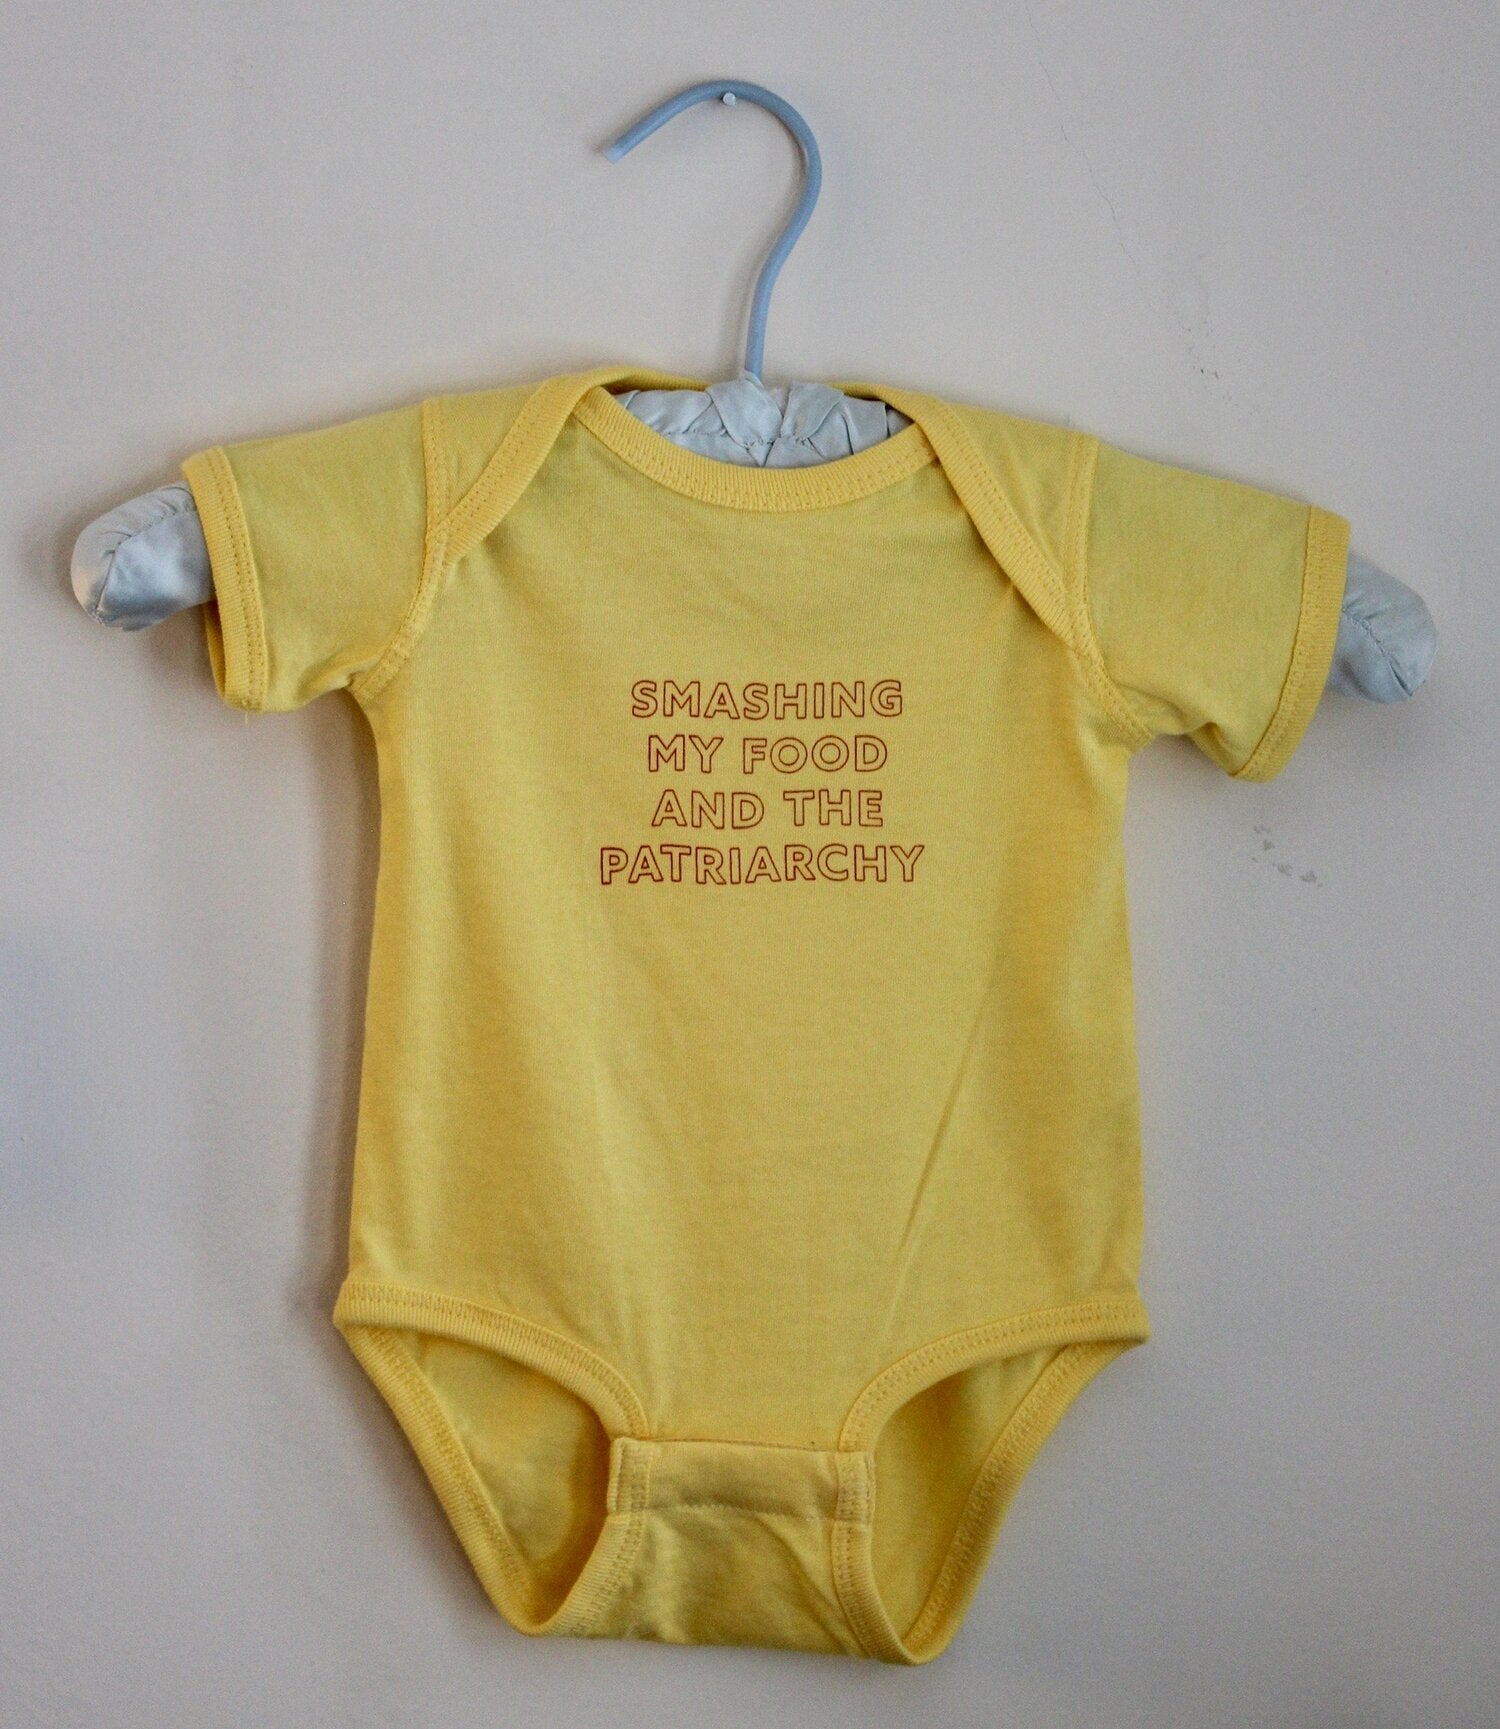 A yellow baby onesie that reads "Smashing my Food and the Patriarchy" hangs on a hanger